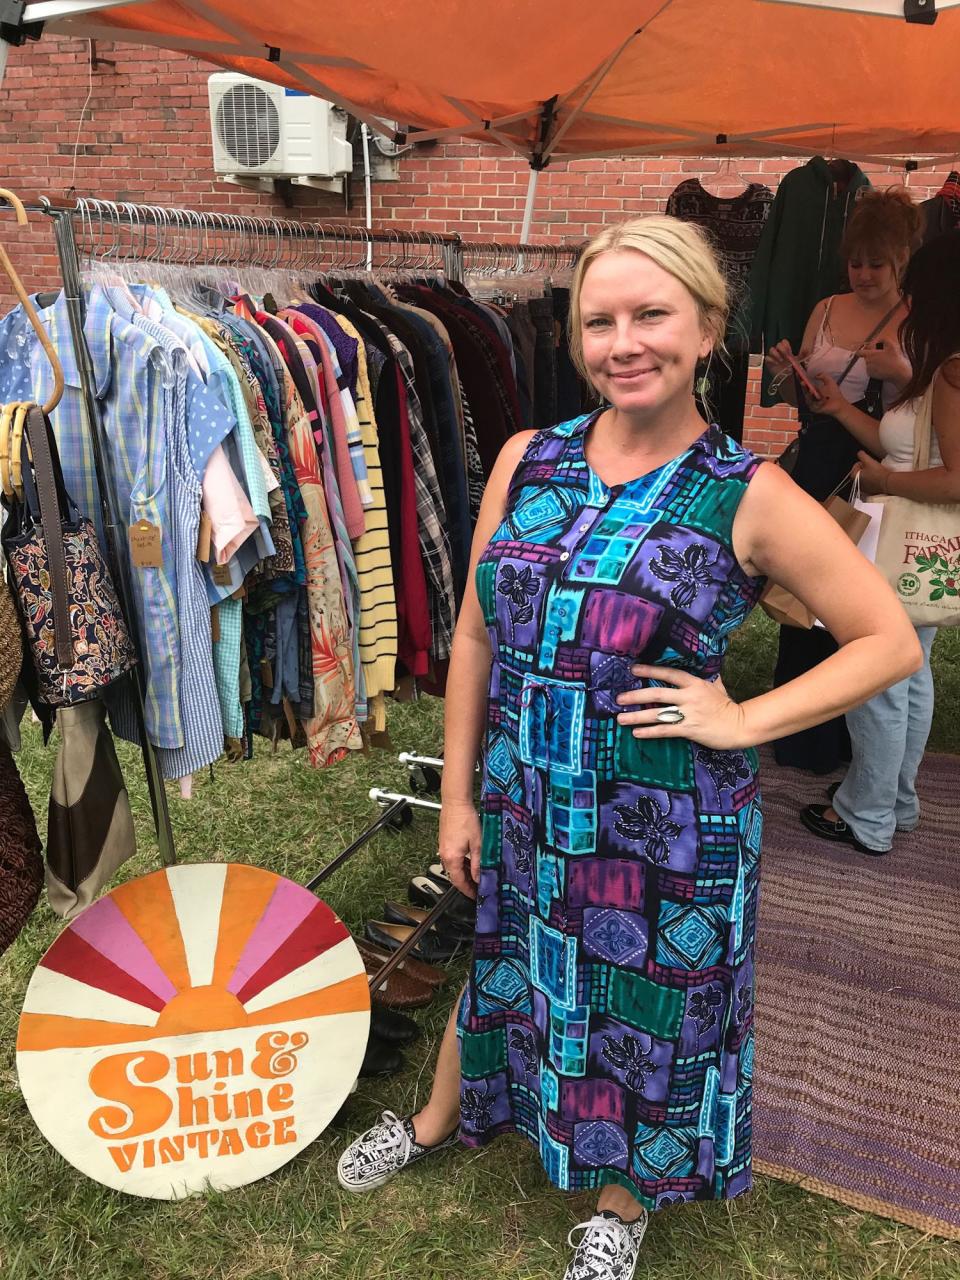 Amanda Vinopal of Sun & Shine Vintage founded the Curated on Castle Vintage Market on Castle Street in 2020. The market now runs every month, and on Sept. 23, Vinopal is organizing the Castle Street Block Party, which will span seven blocks of Castle, from Third Street to 10th Street.